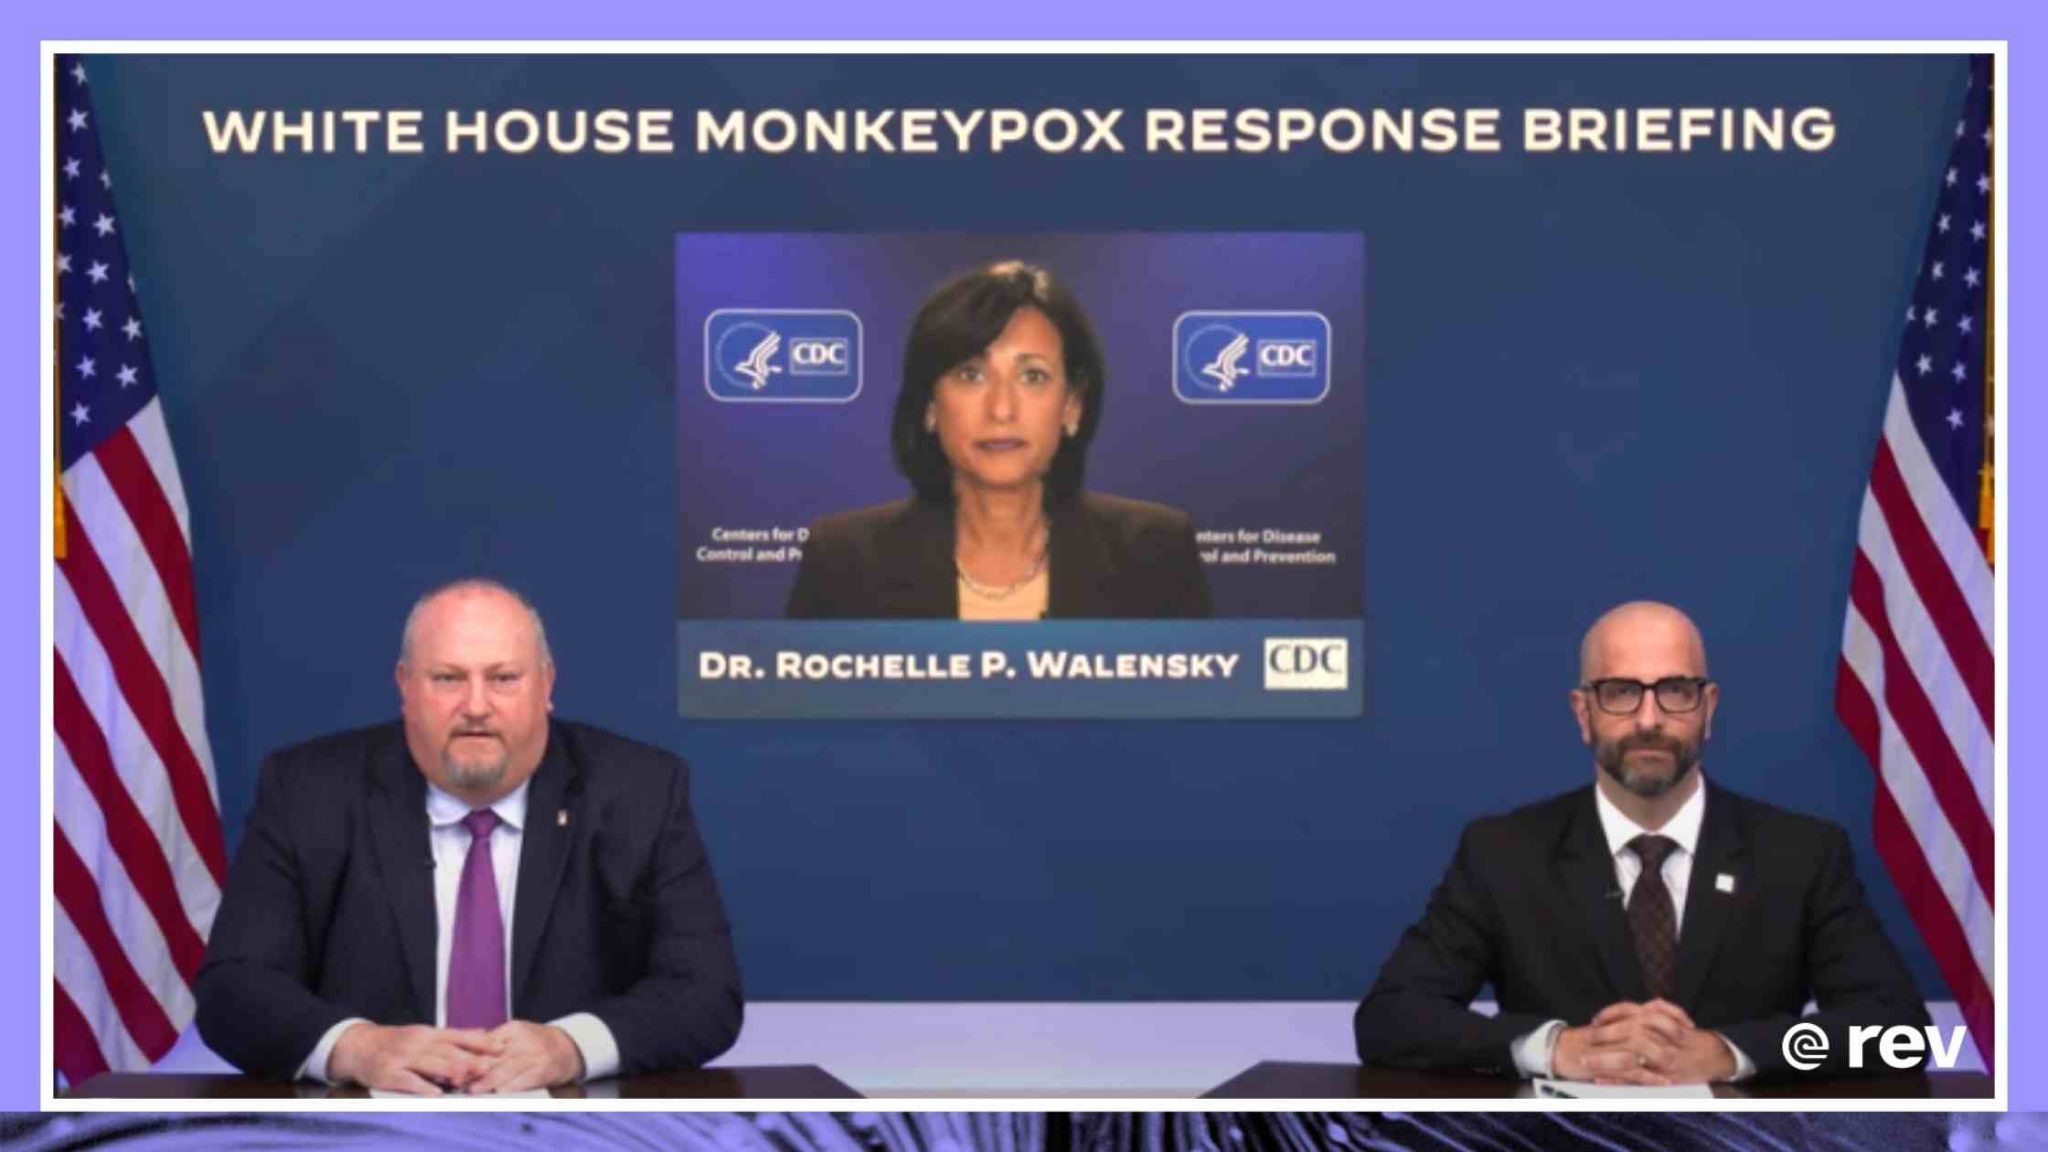 Press Briefing by White House Monkeypox Response Team and Public Health Officials 9/28/22 Transcript